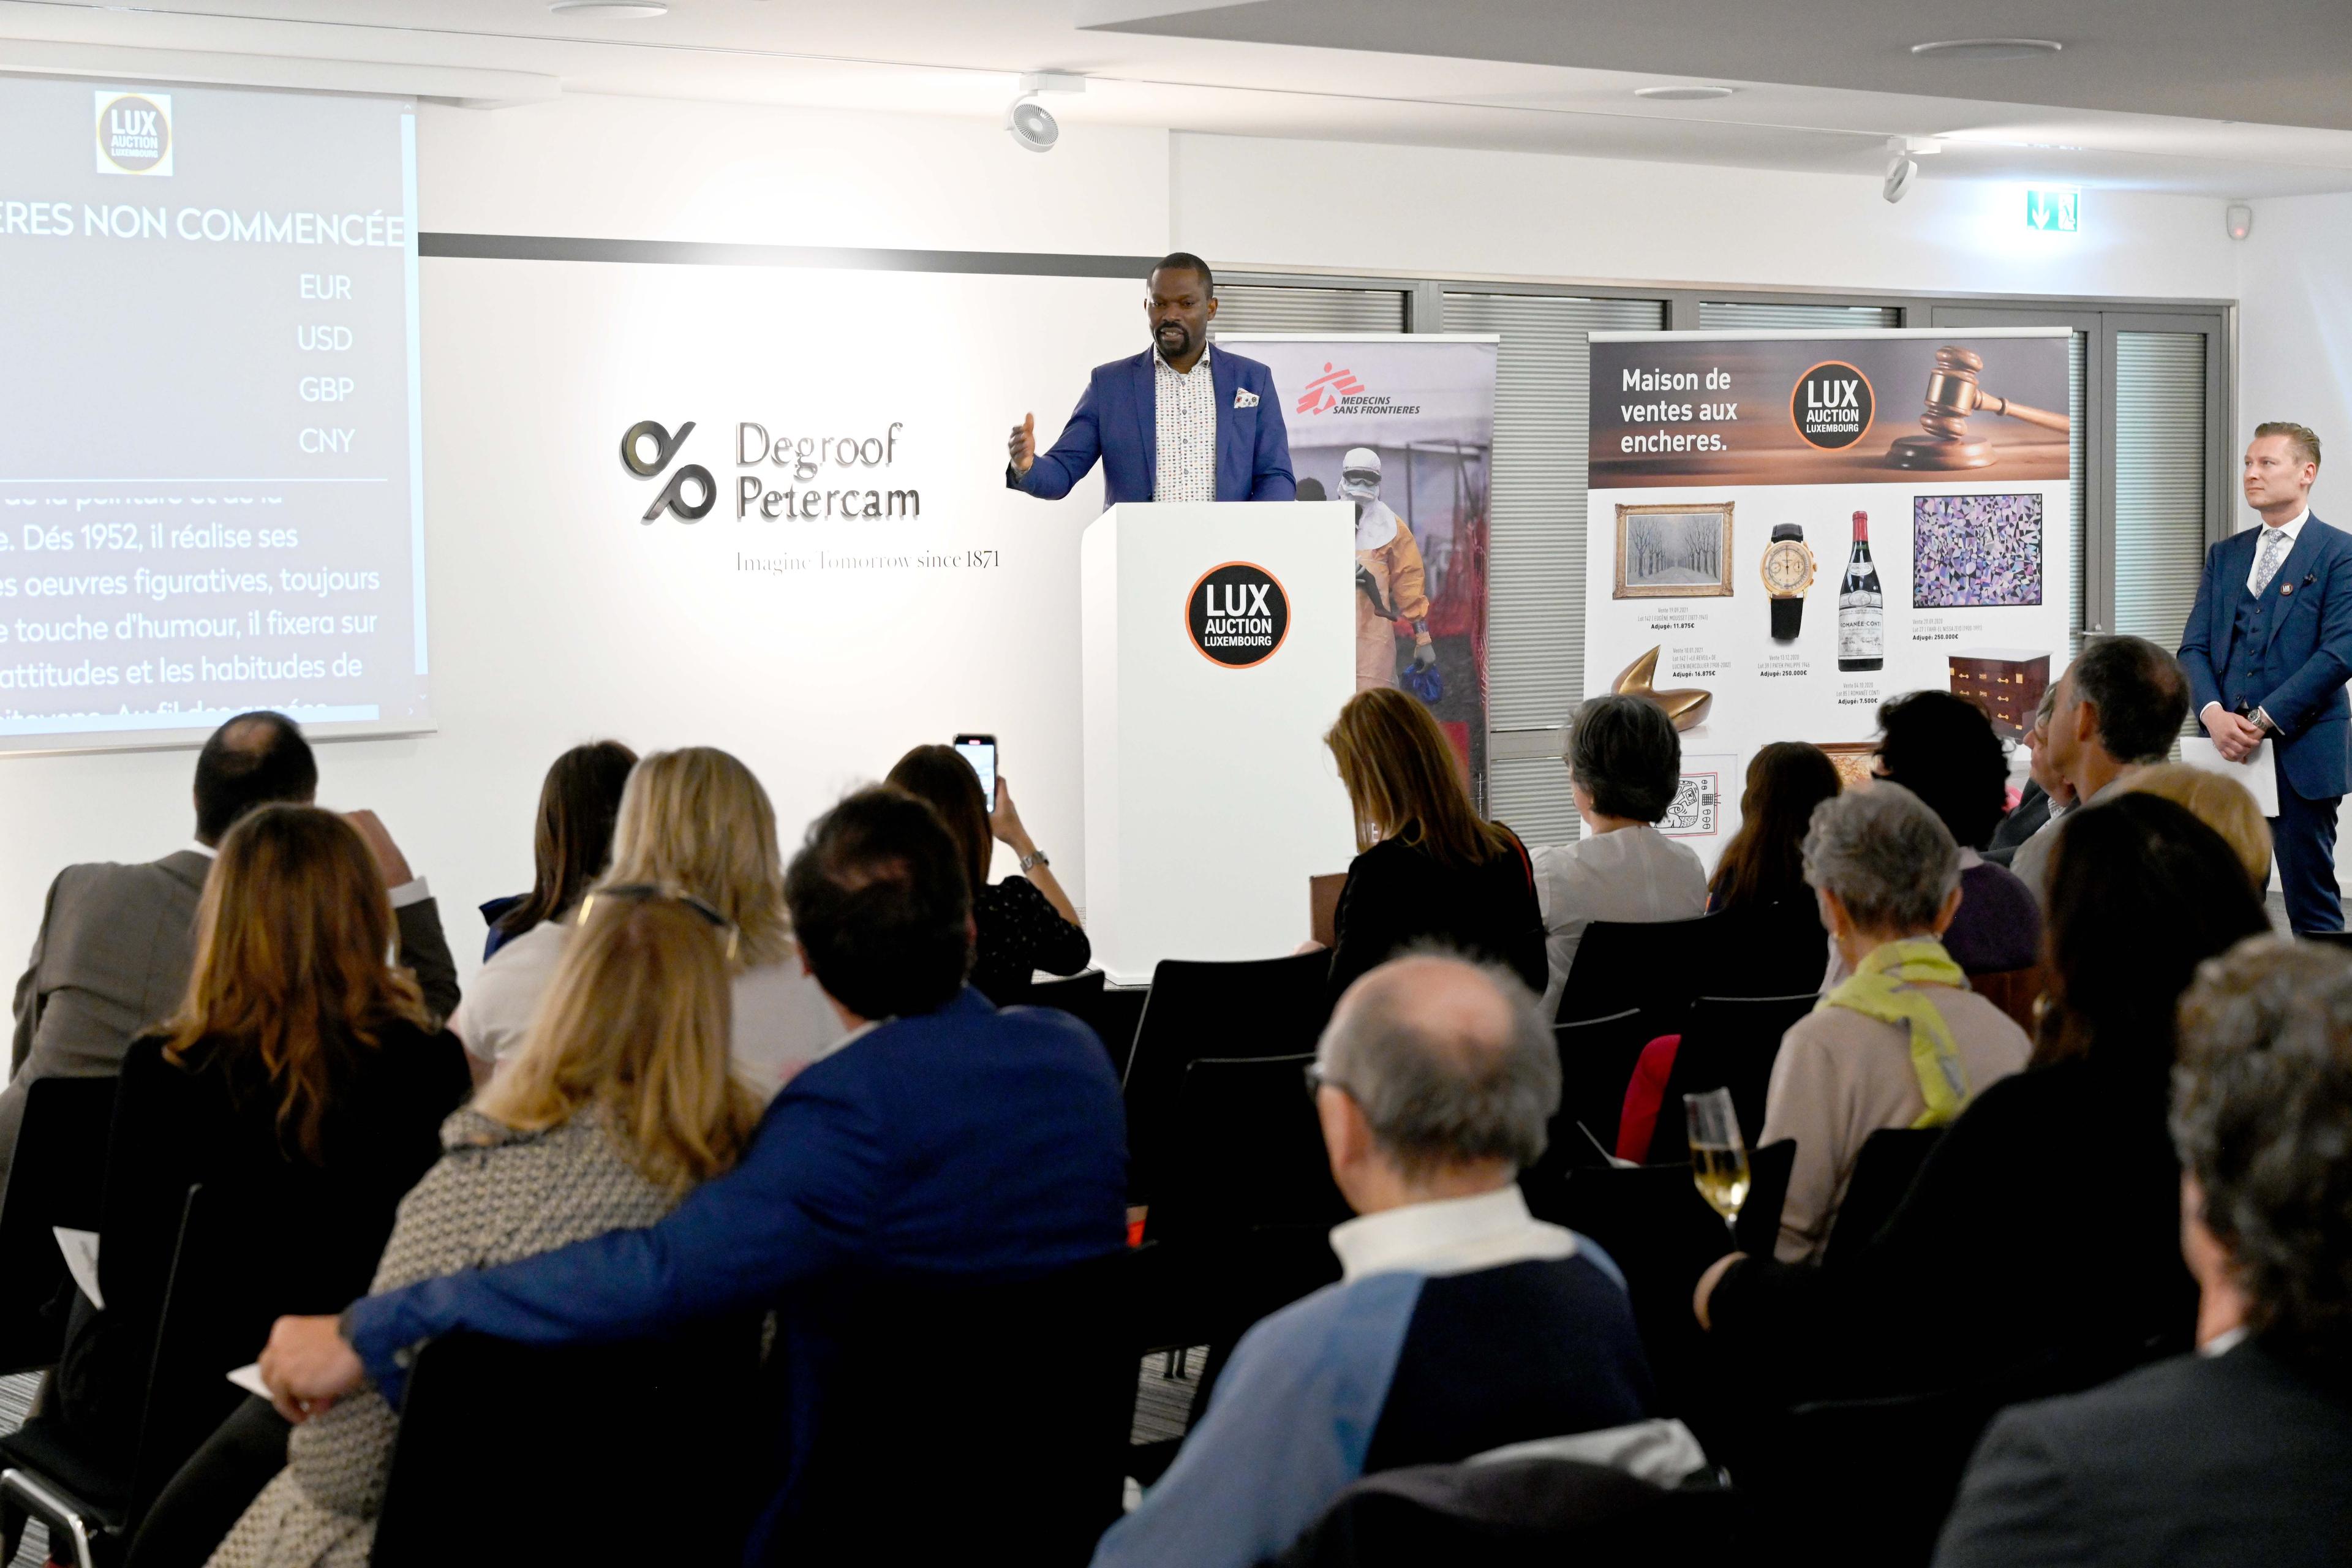 Speech by artist Kingsley Ogwara at the opening of the auction. 24 April 2022 